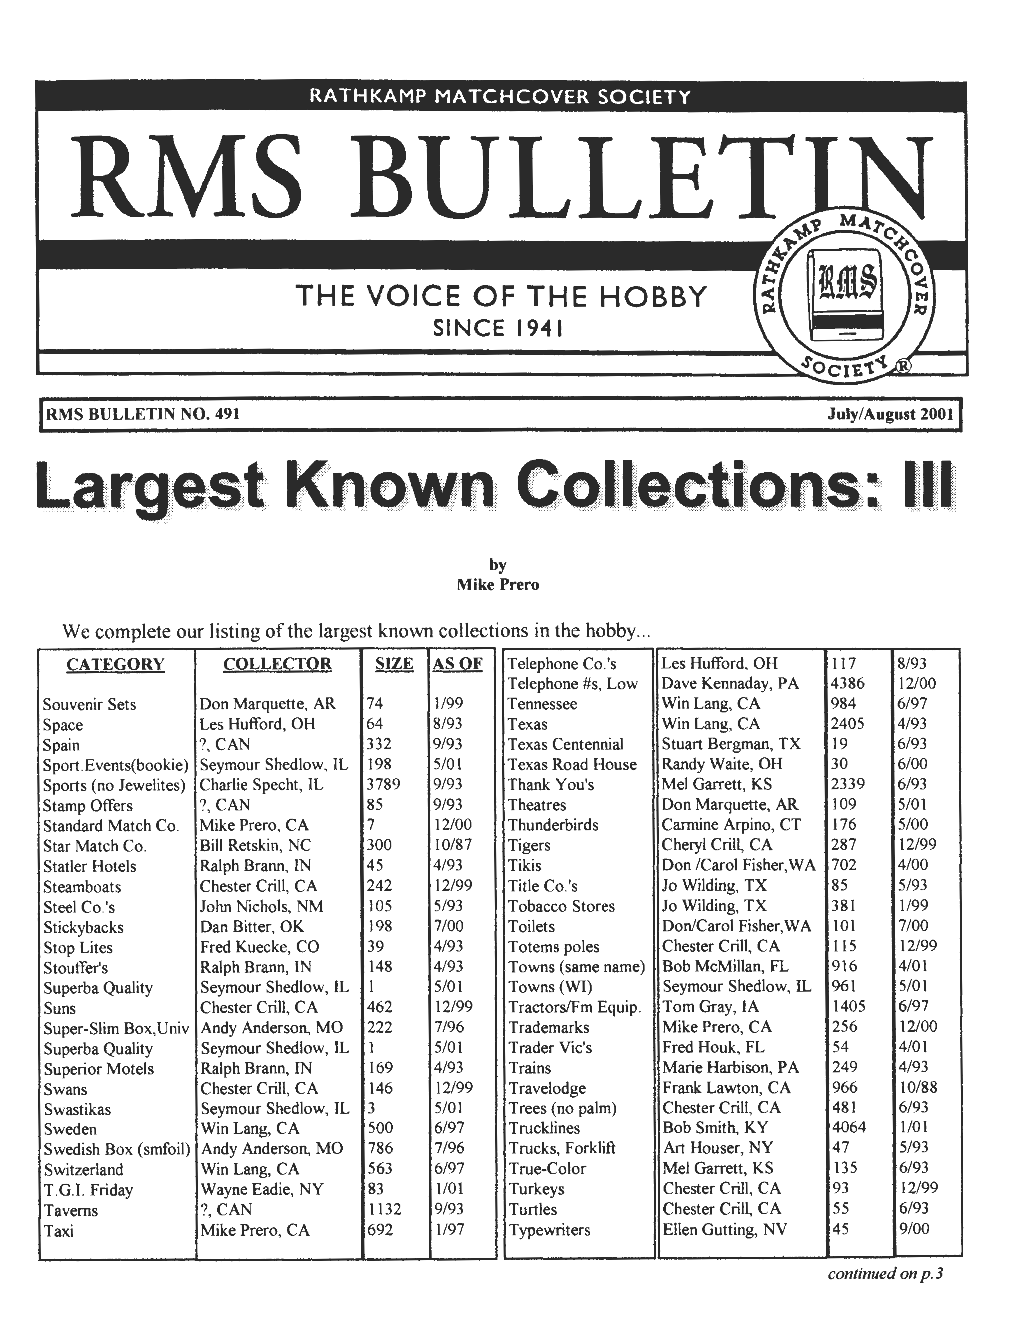 Largest Known Collections: Ill